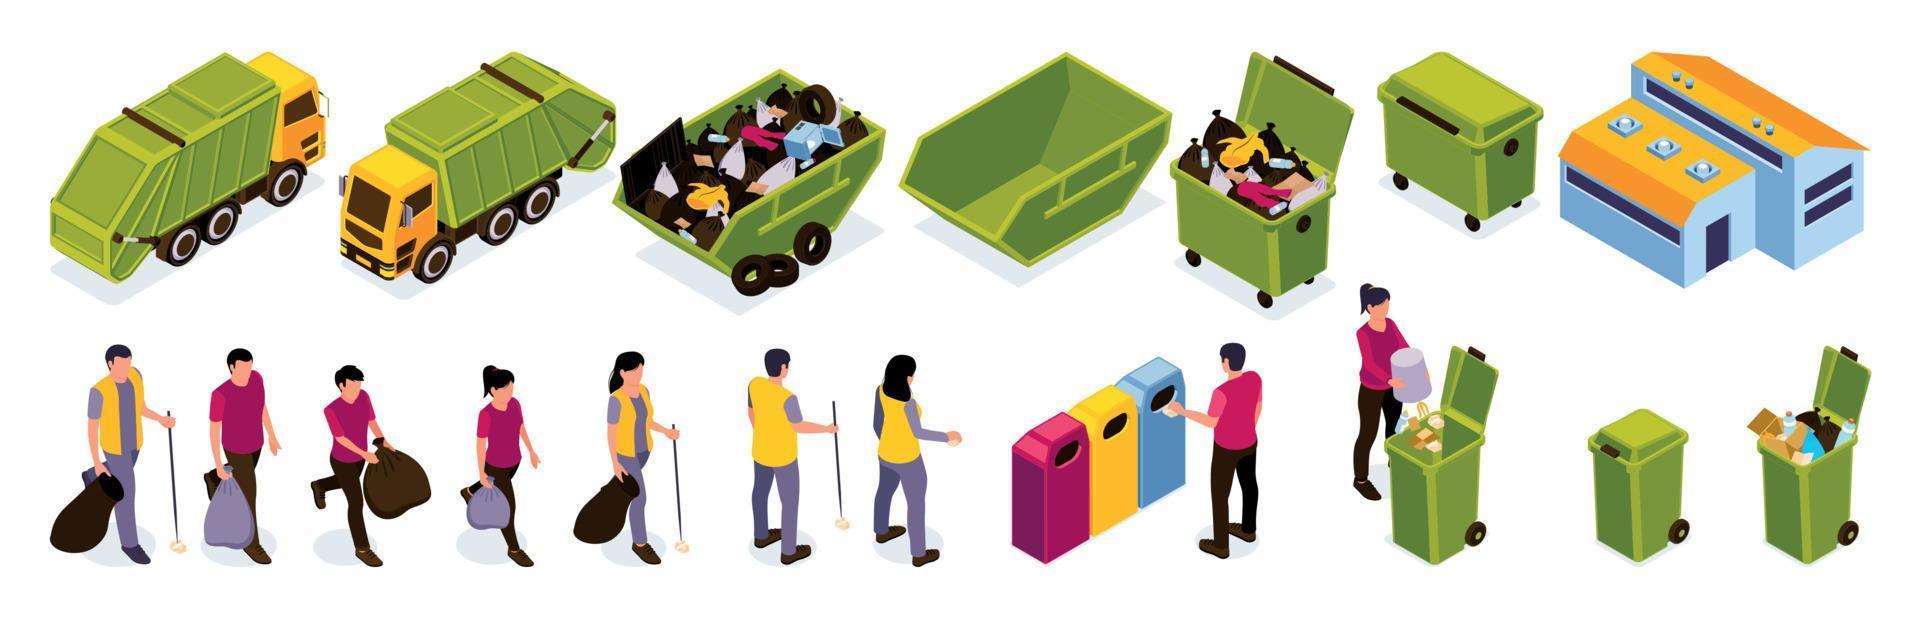 Isometric Garbage Recycling Color Icon Set vector